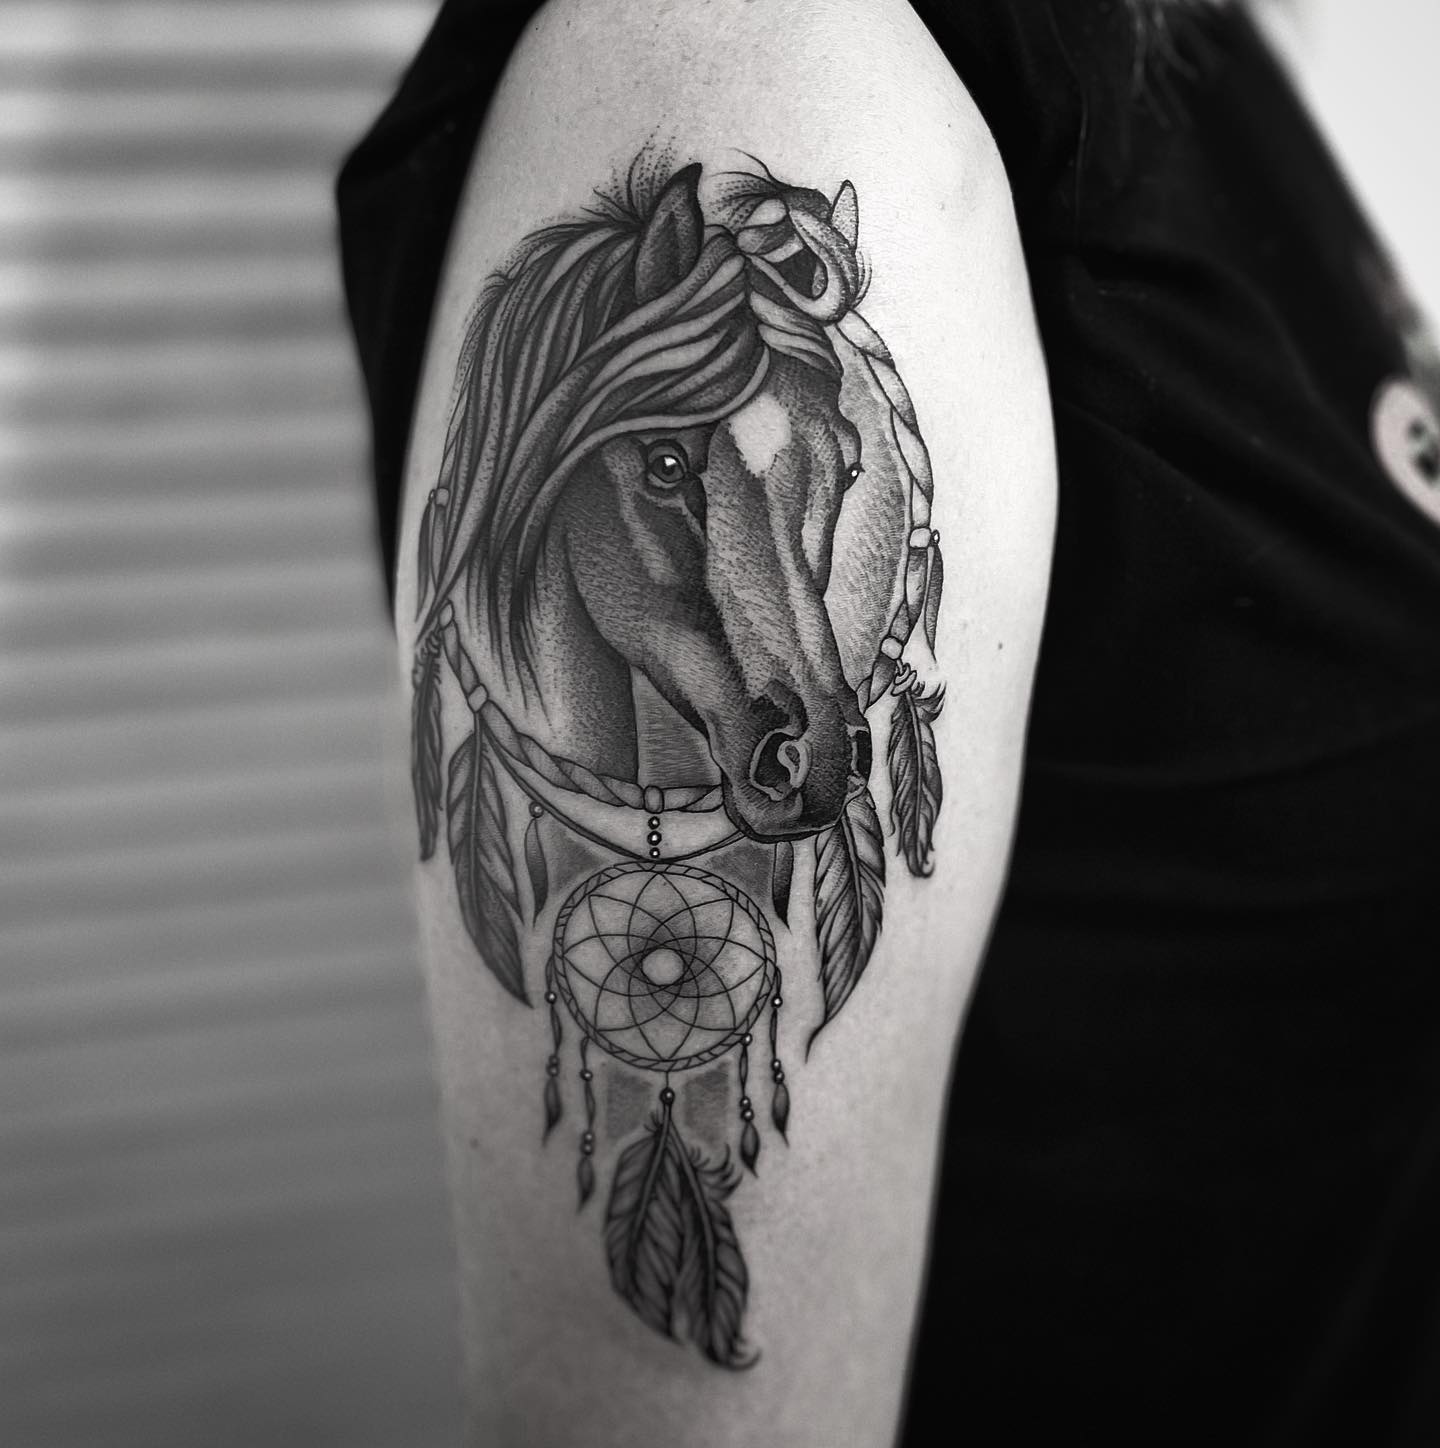 The horse represents freedom, strength, and speed. When these two symbols are combined in one tattoo, it means that you want to free yourself from your bad dreams and achieve unlimited potential. Doesn't the horse look amazing?